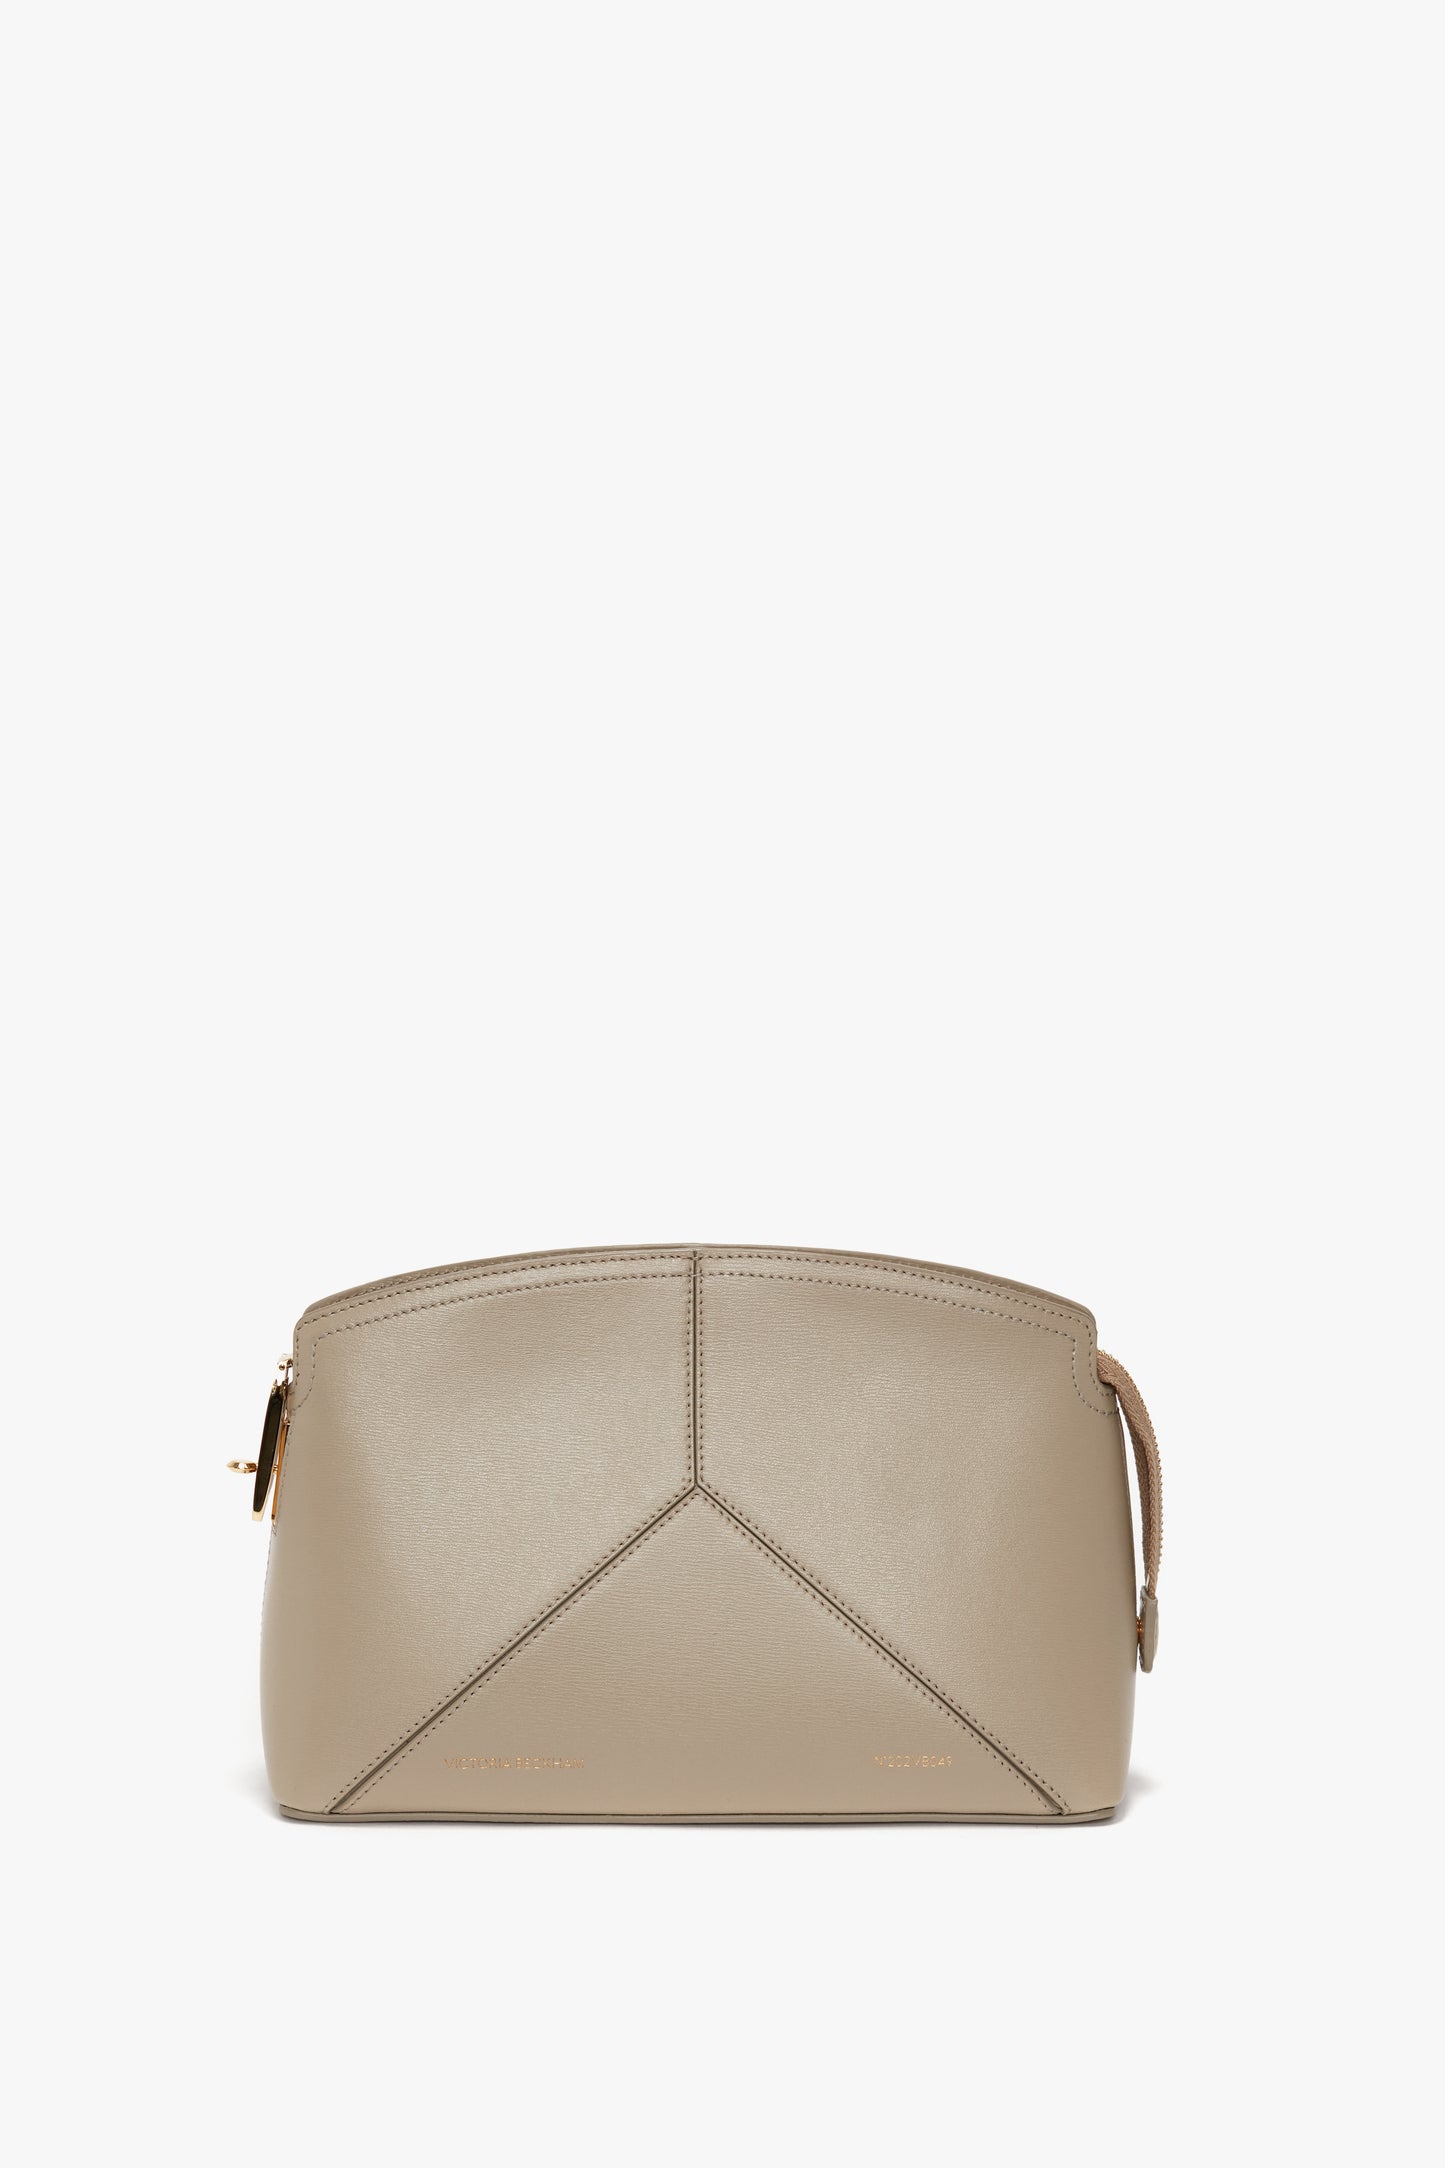 A Victoria Crossbody Bag In Taupe Leather by Victoria Beckham, featuring a minimalist structured design with a central seam and gold-tone zipper closure, inspired by Victoria Beckham's signature style.